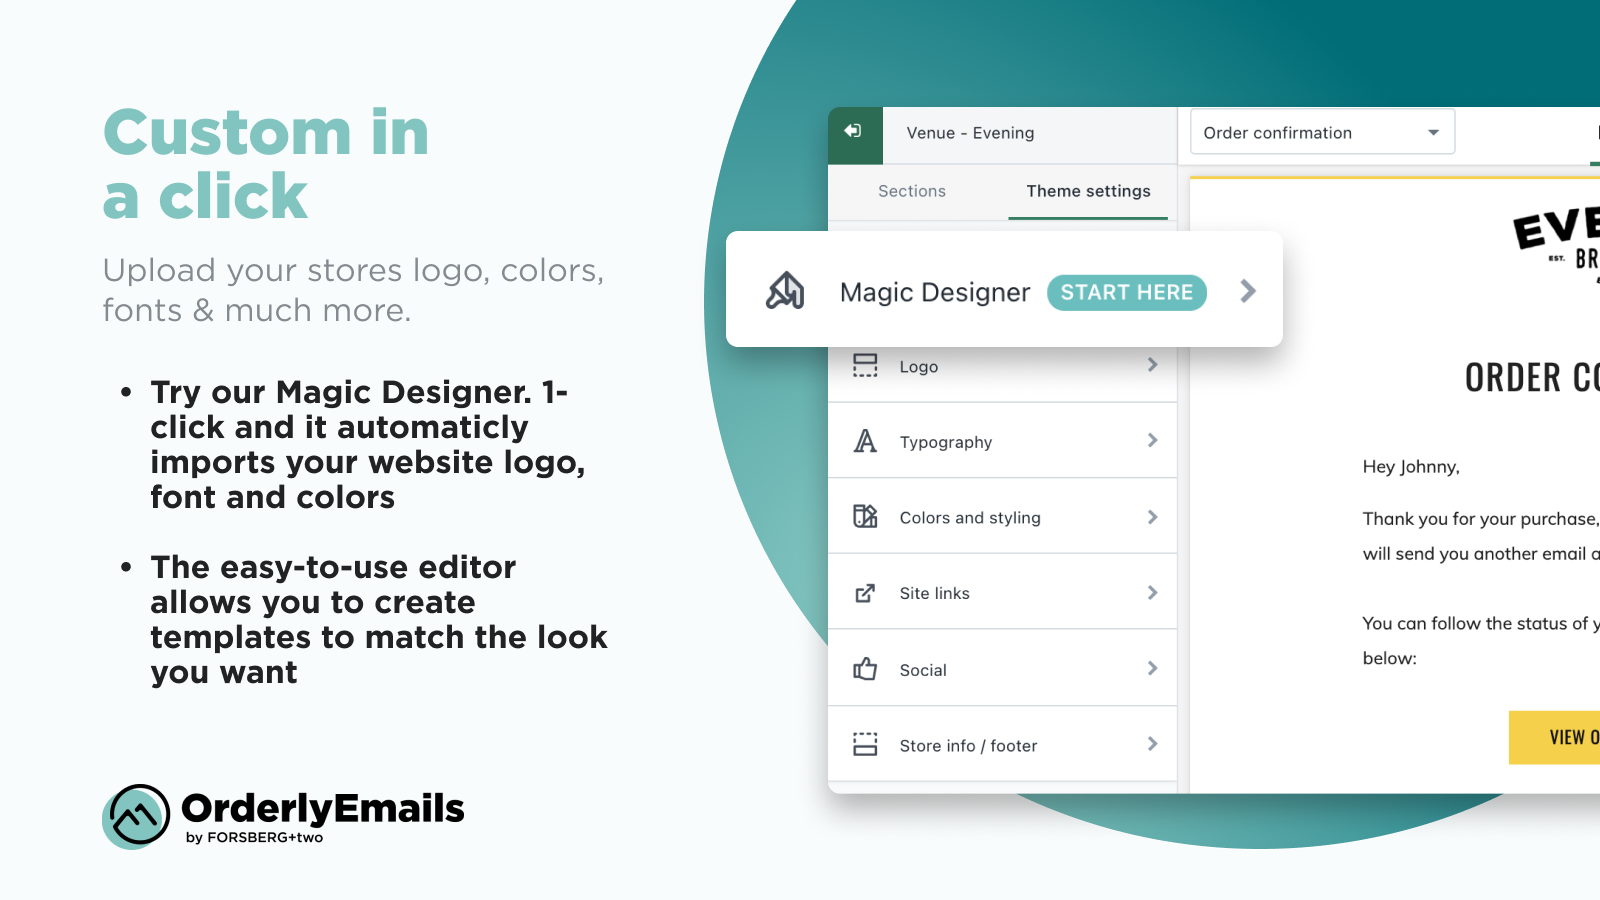 OrderlyEmails: Custom order email templates in a click